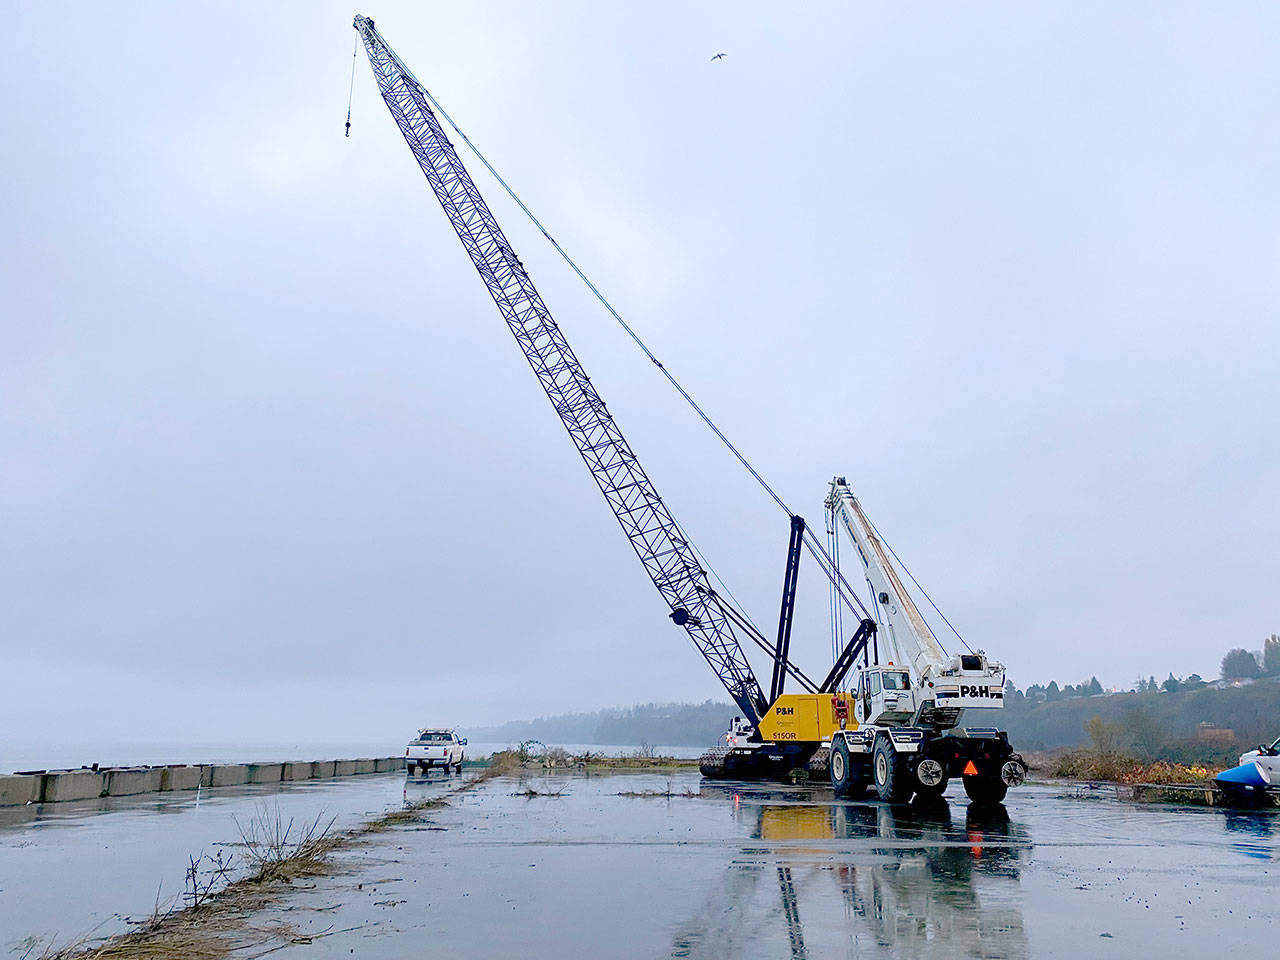 A crane was staged by Rayonier Advanced Materials Inc. last week at the former Rayonier pulp mill site in Port Angeles, where it will begin removing deck panels from a giant pier. (Rayonier Advanced Materials Inc.)